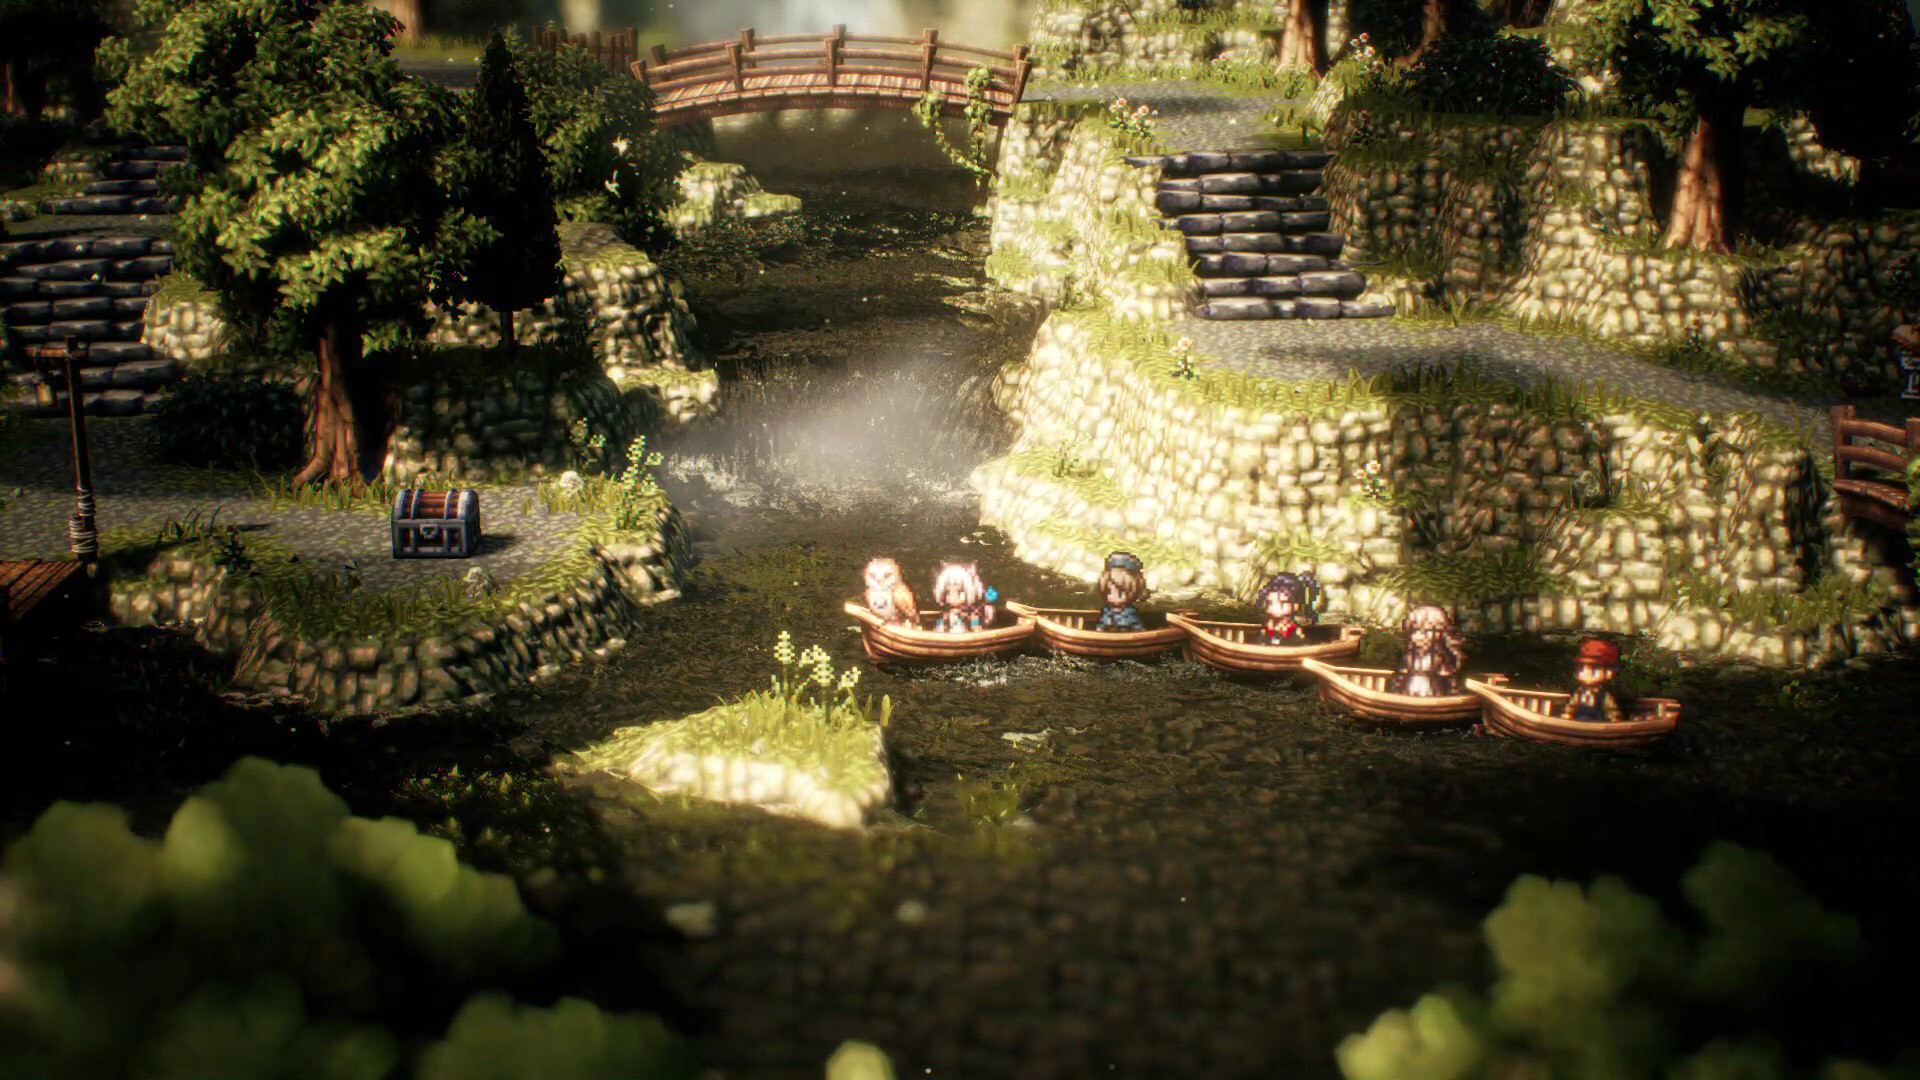 Octopath Traveler II is coming to Xbox next year